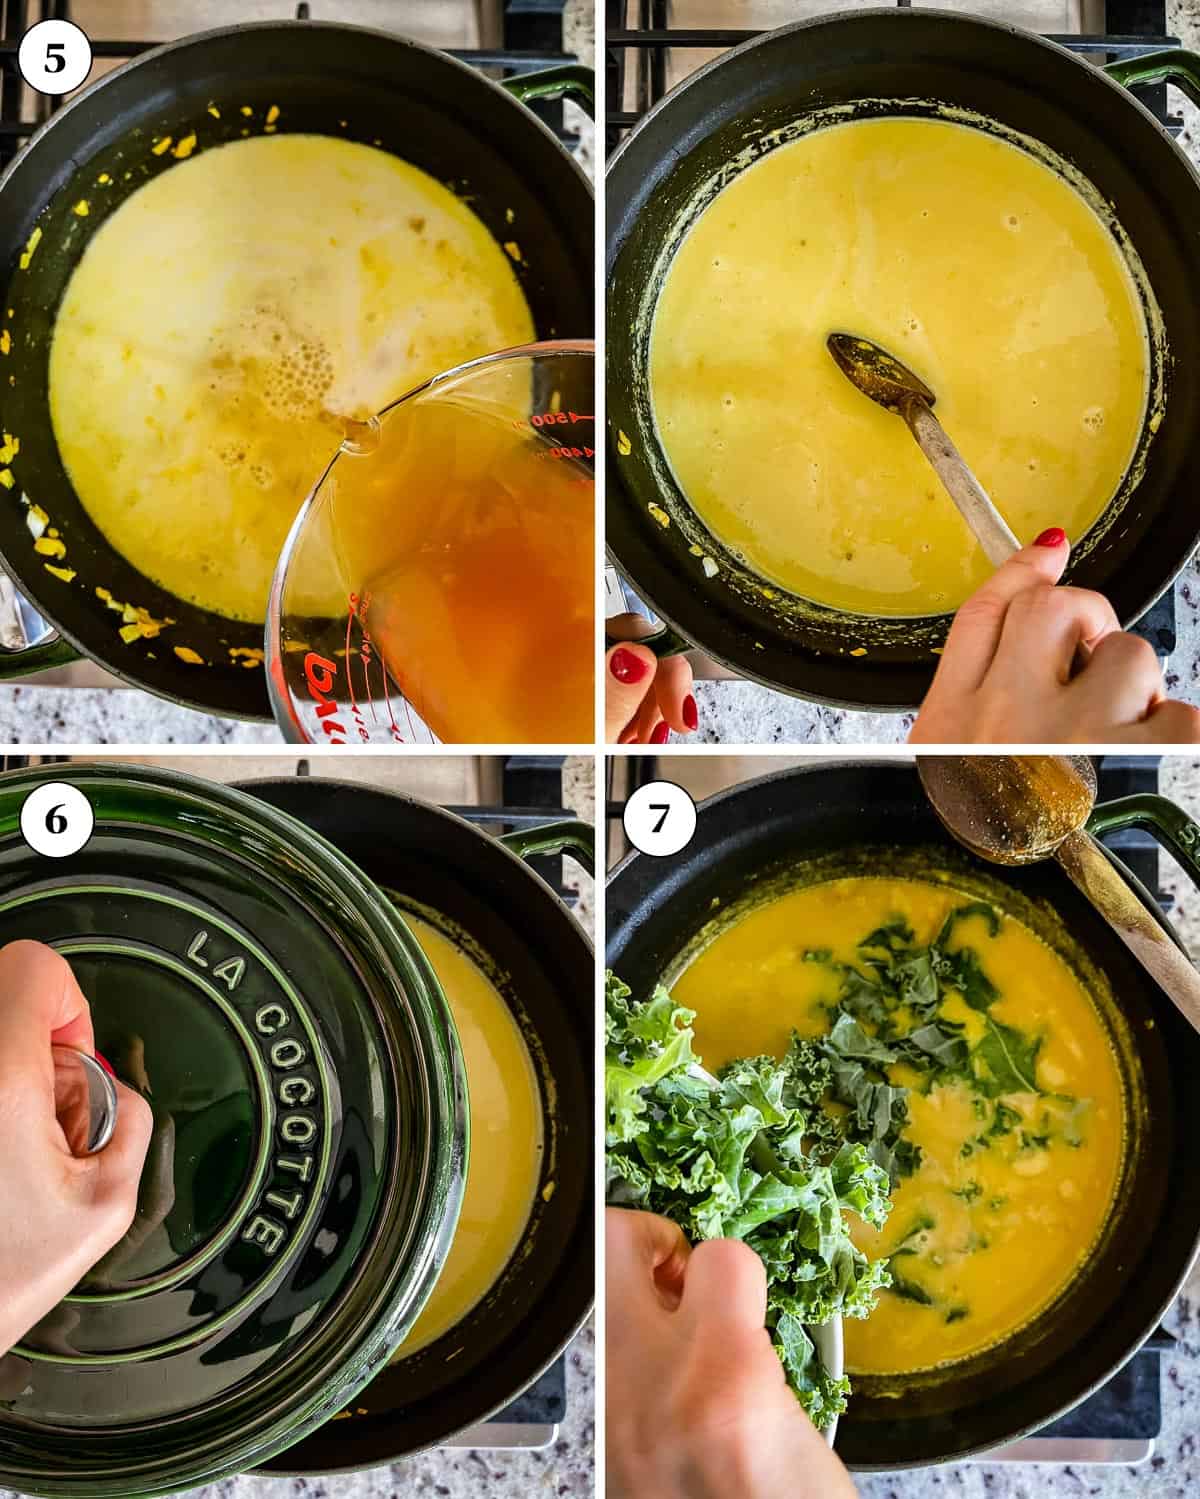 Images showing how to simmer the spiced chickpea stew with coconut and turmeric.